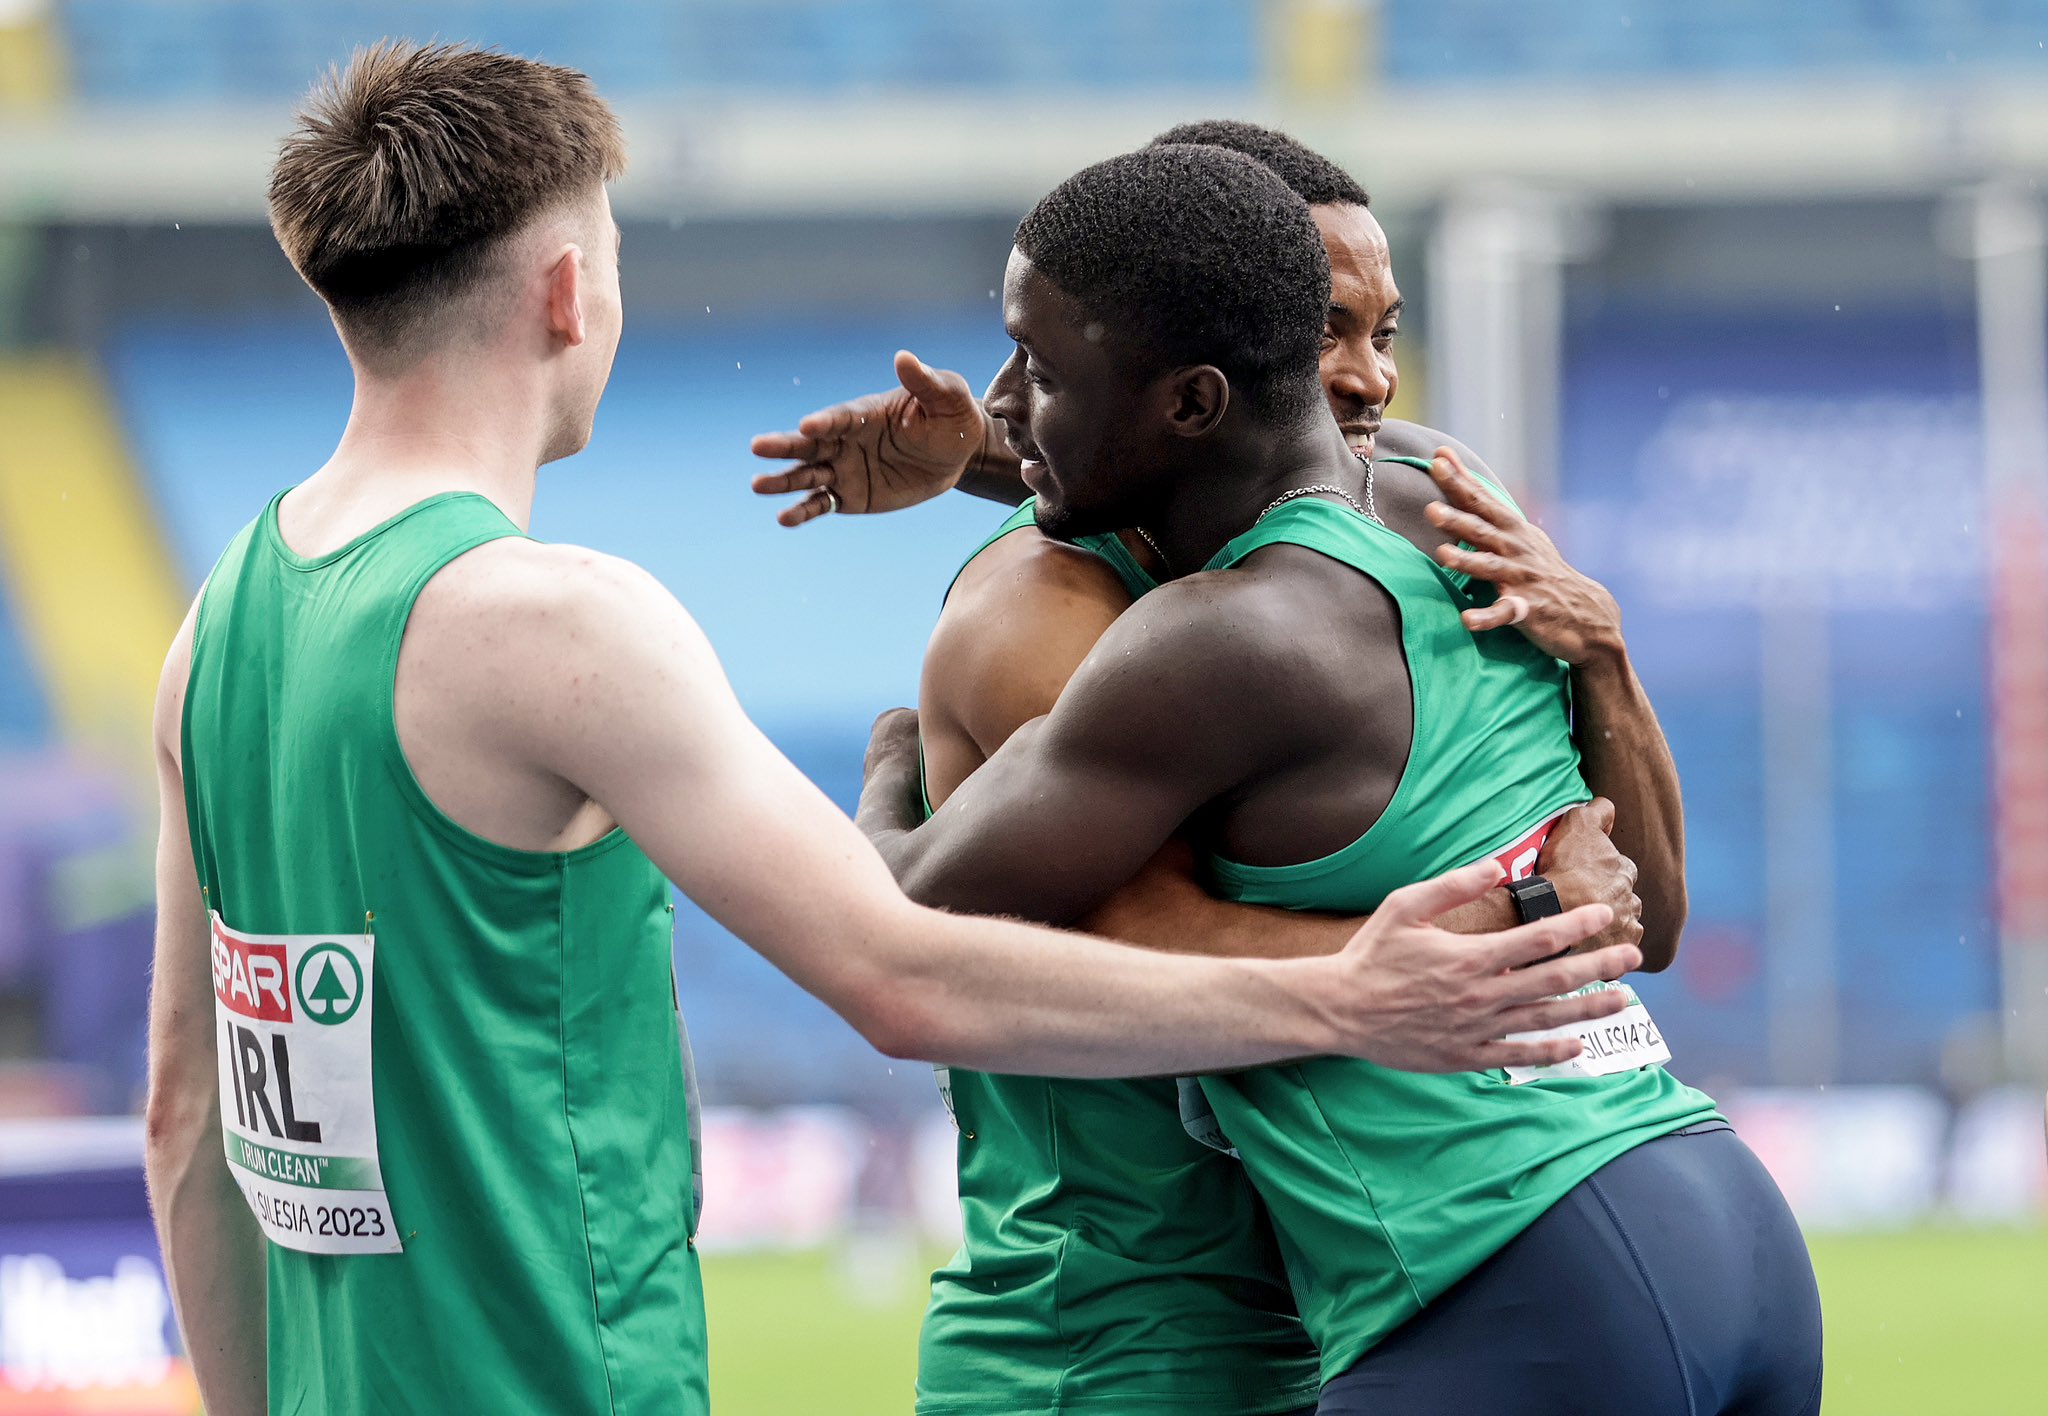 TEAM IRELAND LEAD THE WAY HEADING INTO FINAL DAY